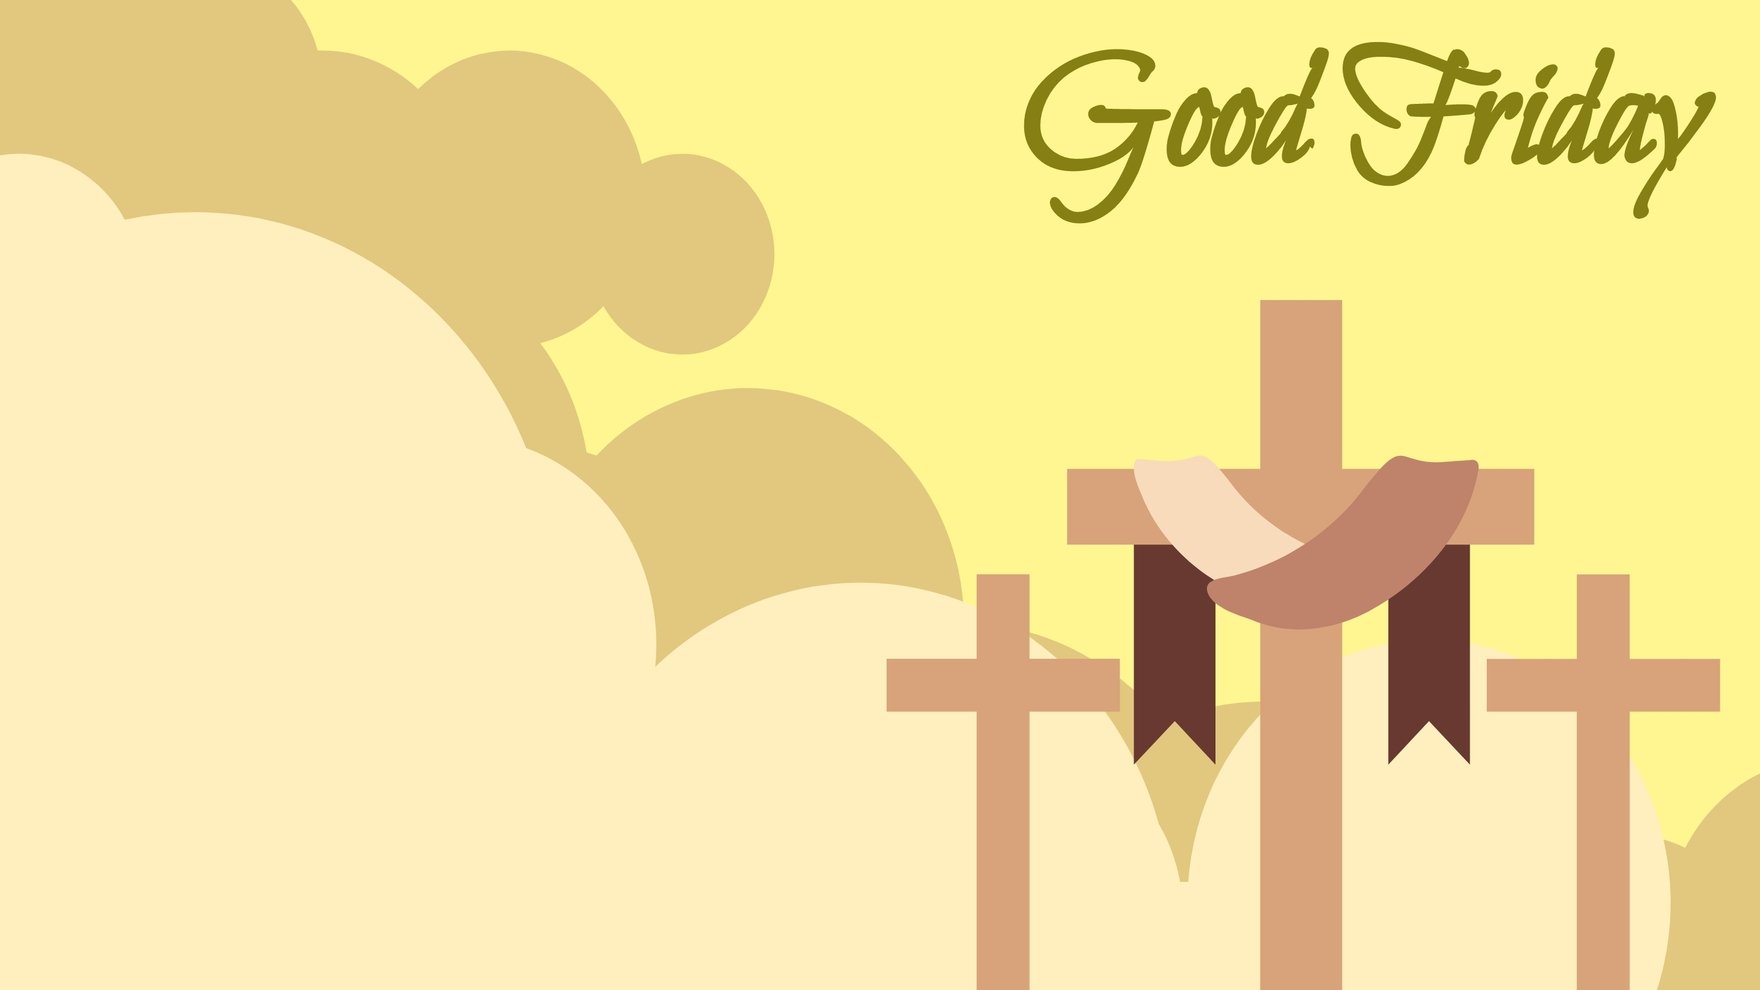 Free Good Friday Yellow Background in PDF, Illustrator, PSD, EPS, SVG, JPG, PNG